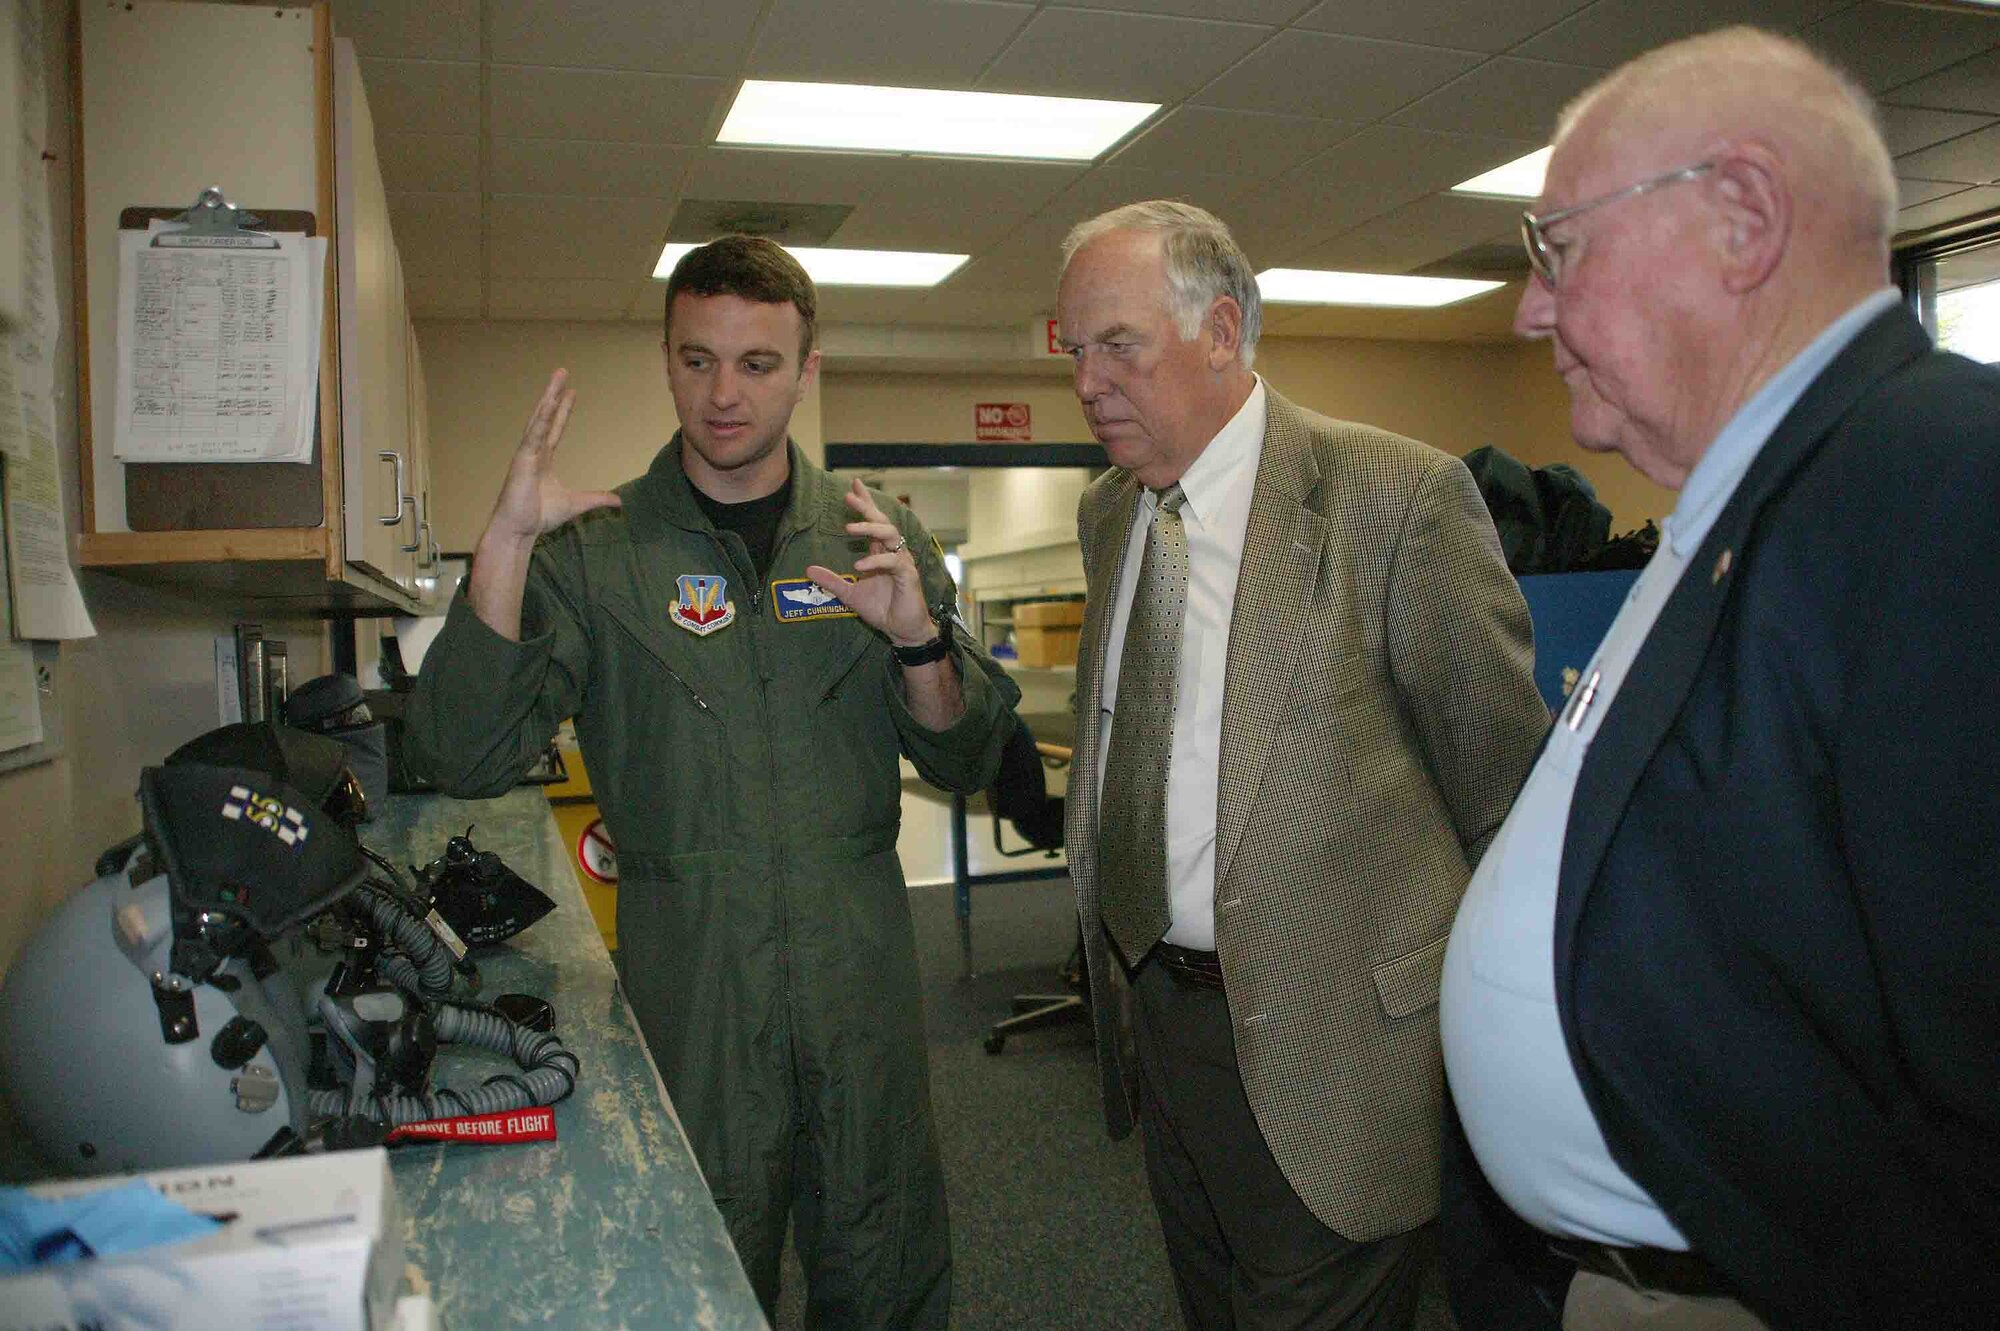 SHAW AIR FORCE BASE, S.C. -- Maj. Jeff Cunningham (left), 55th Fighter Squadron F-16CJ fighter pilot, discusses the technology of a fighter pilot's helmet to John Peebles (center), 20th Fighter Wing Association president, and Robert Scofner, local representative of the 20th FW Association, April 23. During their visit, Mr. Peebles and Mr. Scofner met with wing leaders and toured the 55th Fighter Squadron. The 20th FW Association is composed of former members of the wing, its subordinate organizations and its predecessors to promote the history of the unit. The 20th FW traces its lineage to the 20th Pursuit Group which was later absorbed by the 20th Fighter Bomber Wing. The 20th was one of the 13 original combat air groups formed by the Army before World War II.  (U.S. Air Force photo/Senior Airman John Gordinier)